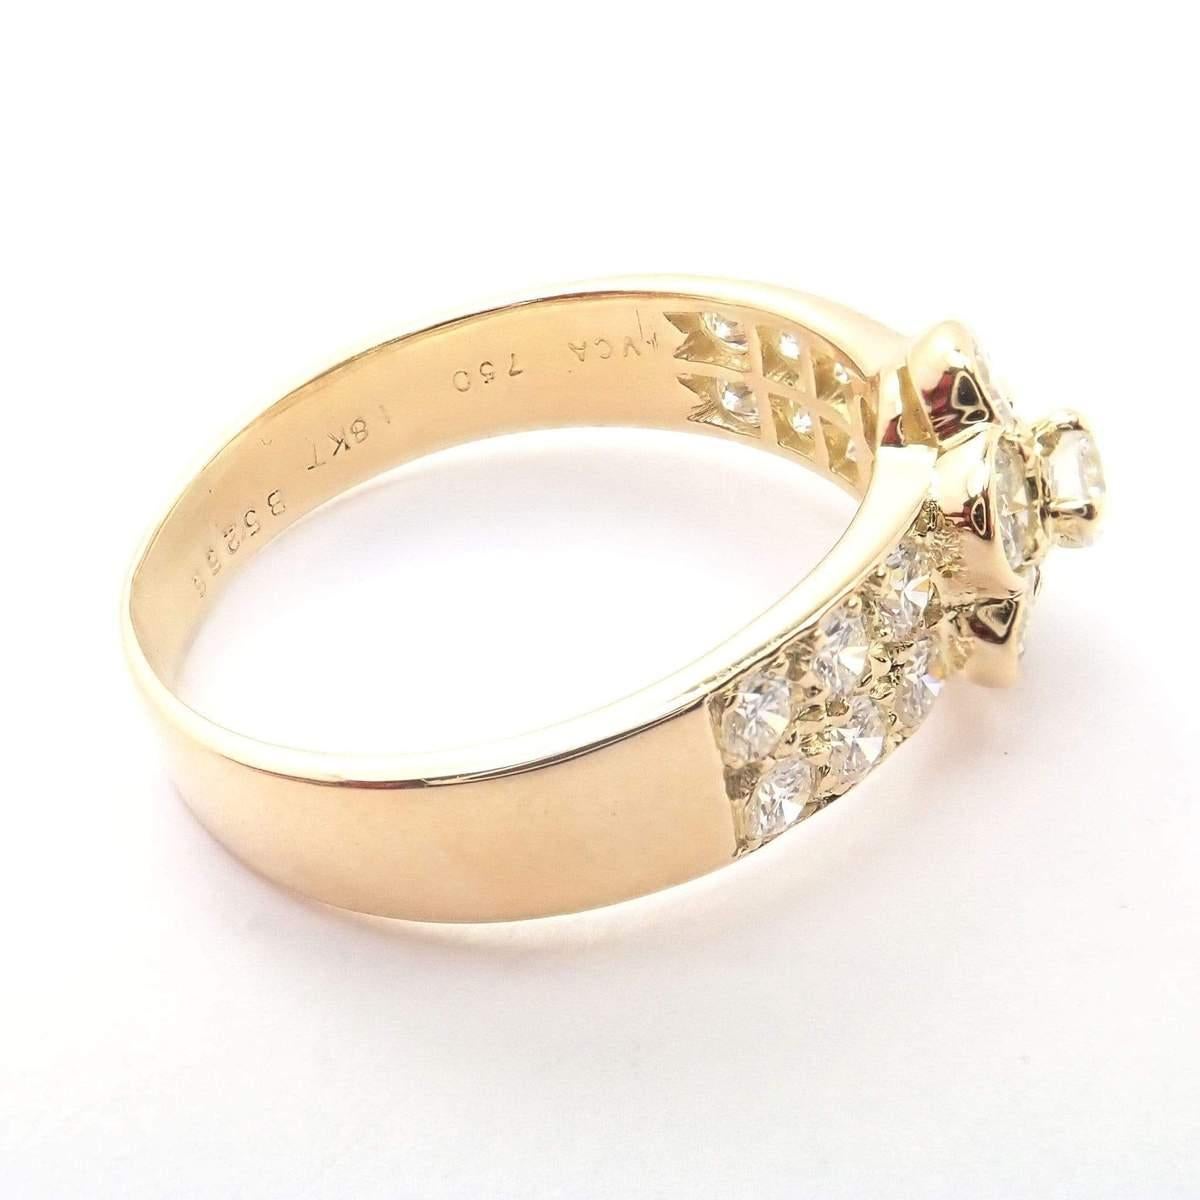 Van Cleef & Arpels 18k Yellow Gold Diamond Fleurette Ring. 
With 1.11 Carats in Total Diamond Weight. 
Metal: 18k Yellow Gold
Ring Size: 7 (resize available) 
Width at Top: 9mm
Weight: 3.7 grams
Stones: 19 Diamonds
VS1 Clarity, G Color
Total Diamond